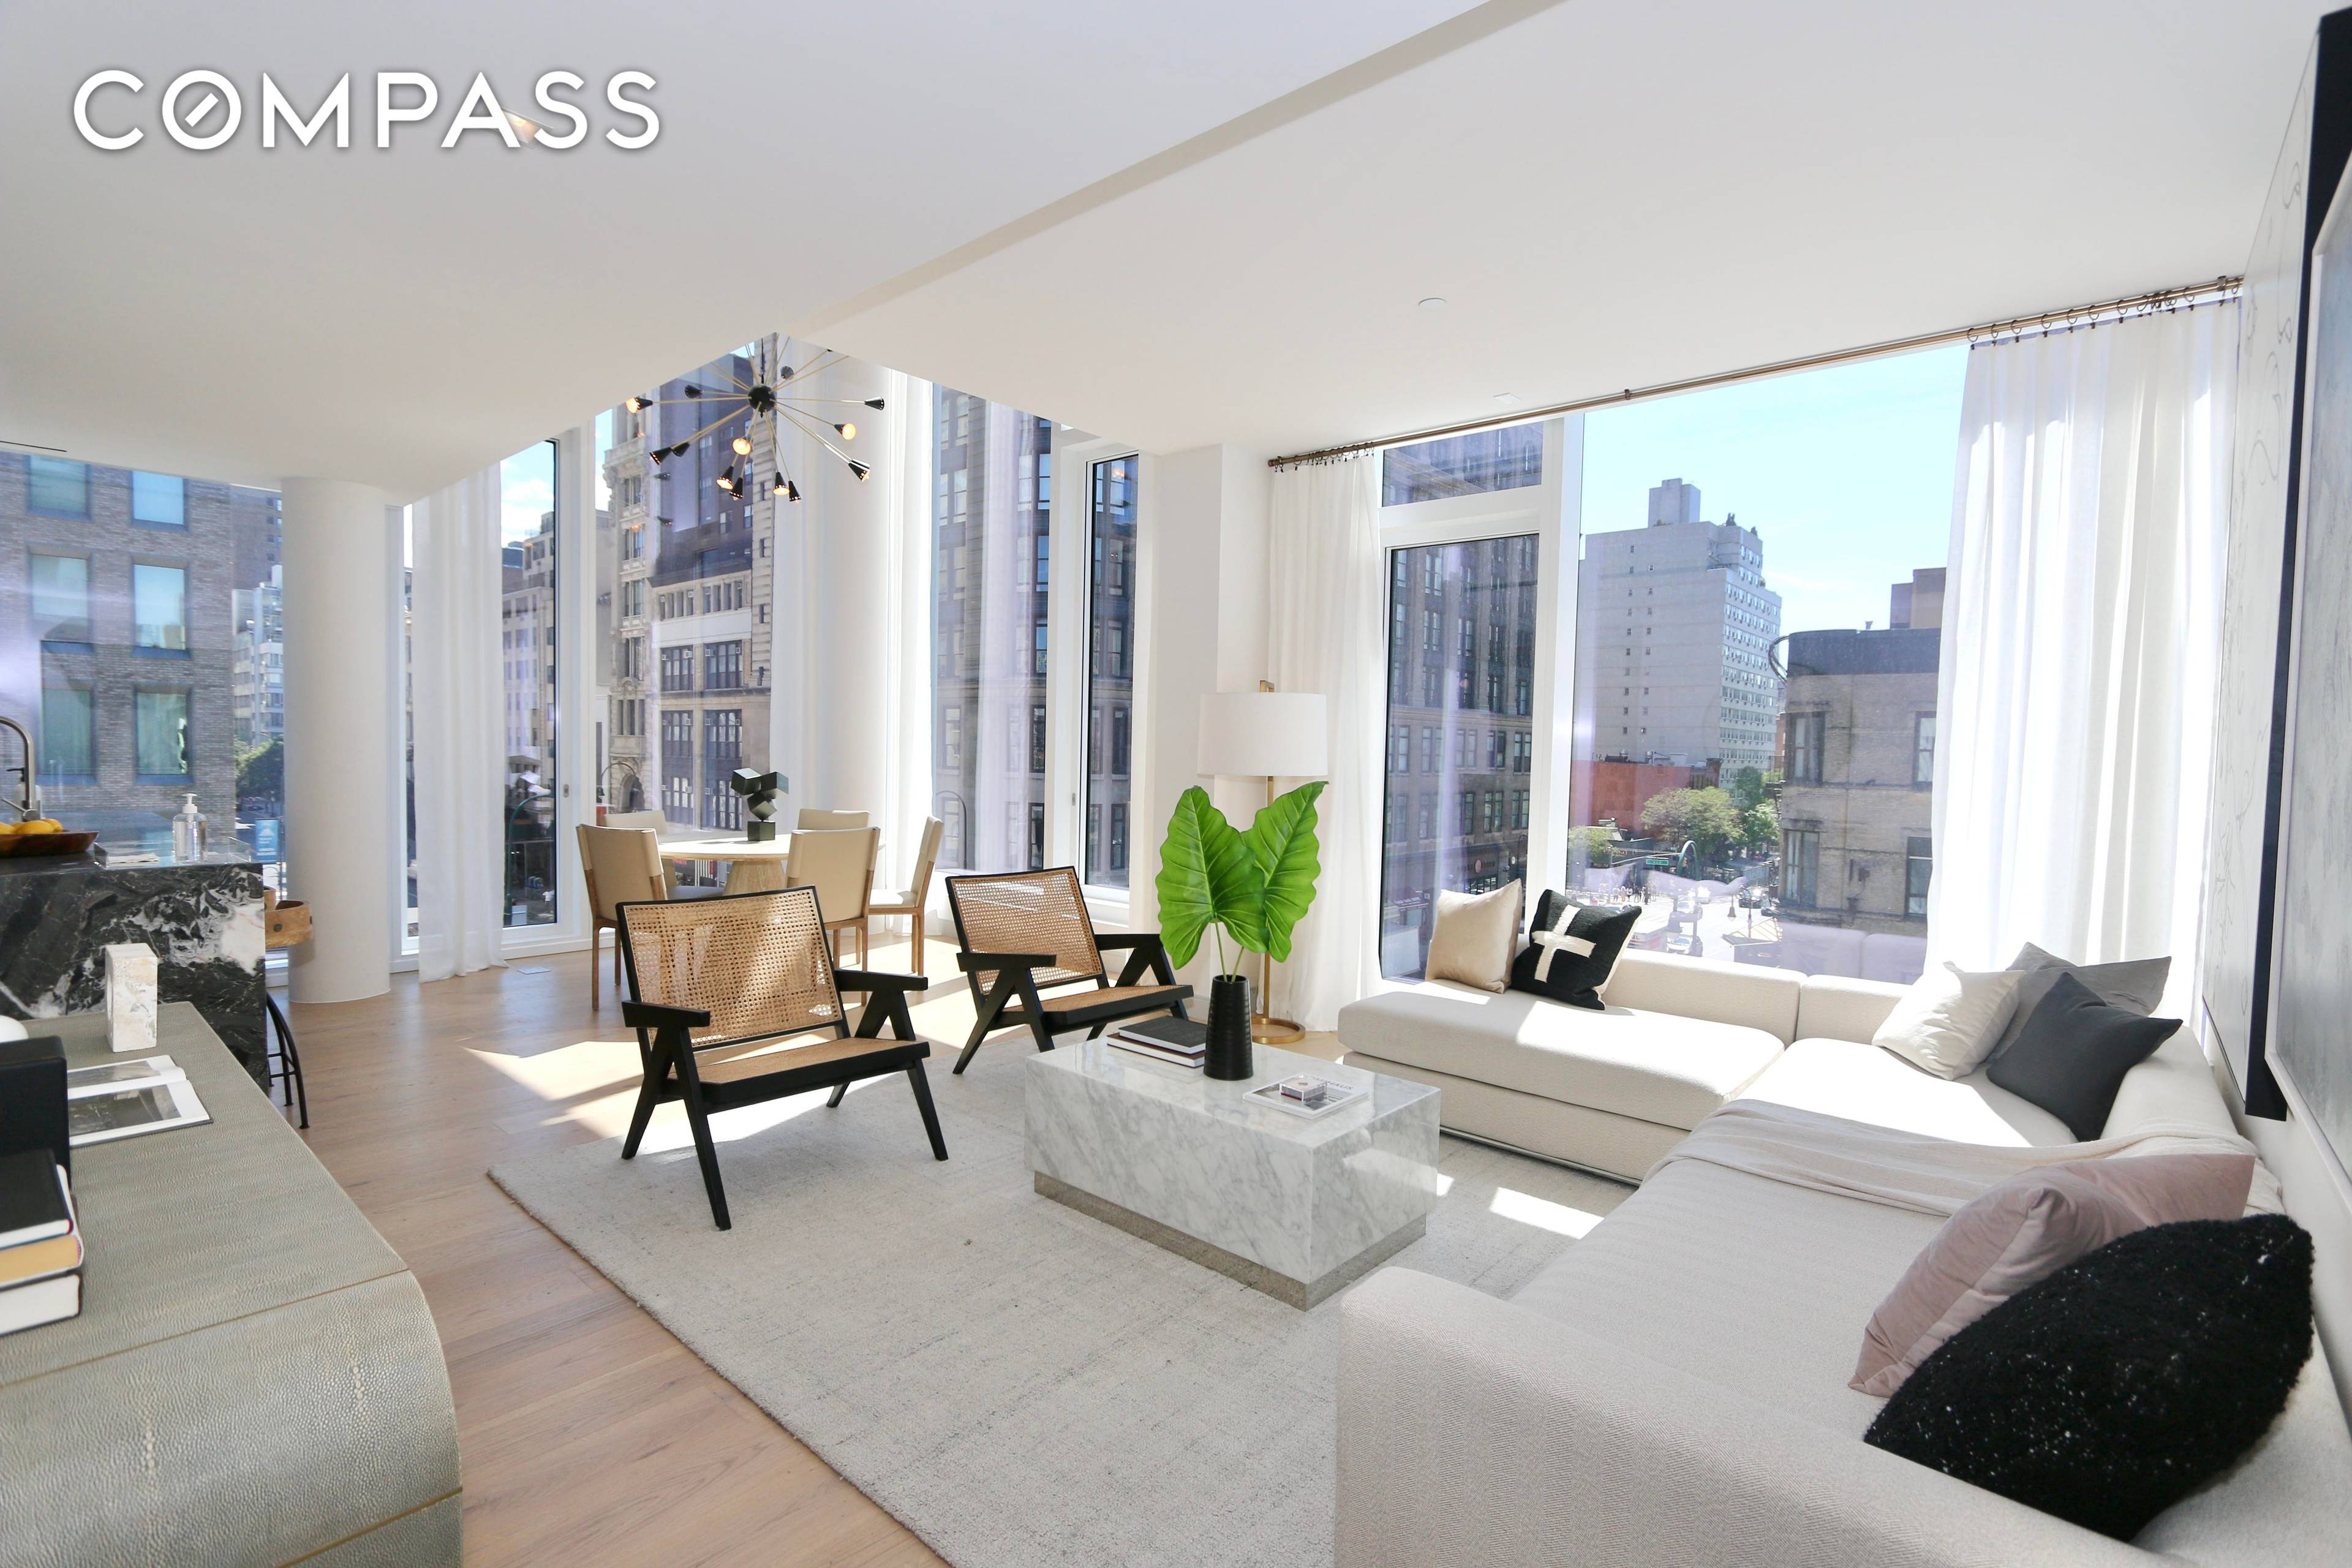 IMMEDIATE OCCUPANCY. Experience the elegance of this masterfully crafted two bedroom, two bathroom luxury home at the stunning new development, 101 West 14th Street !